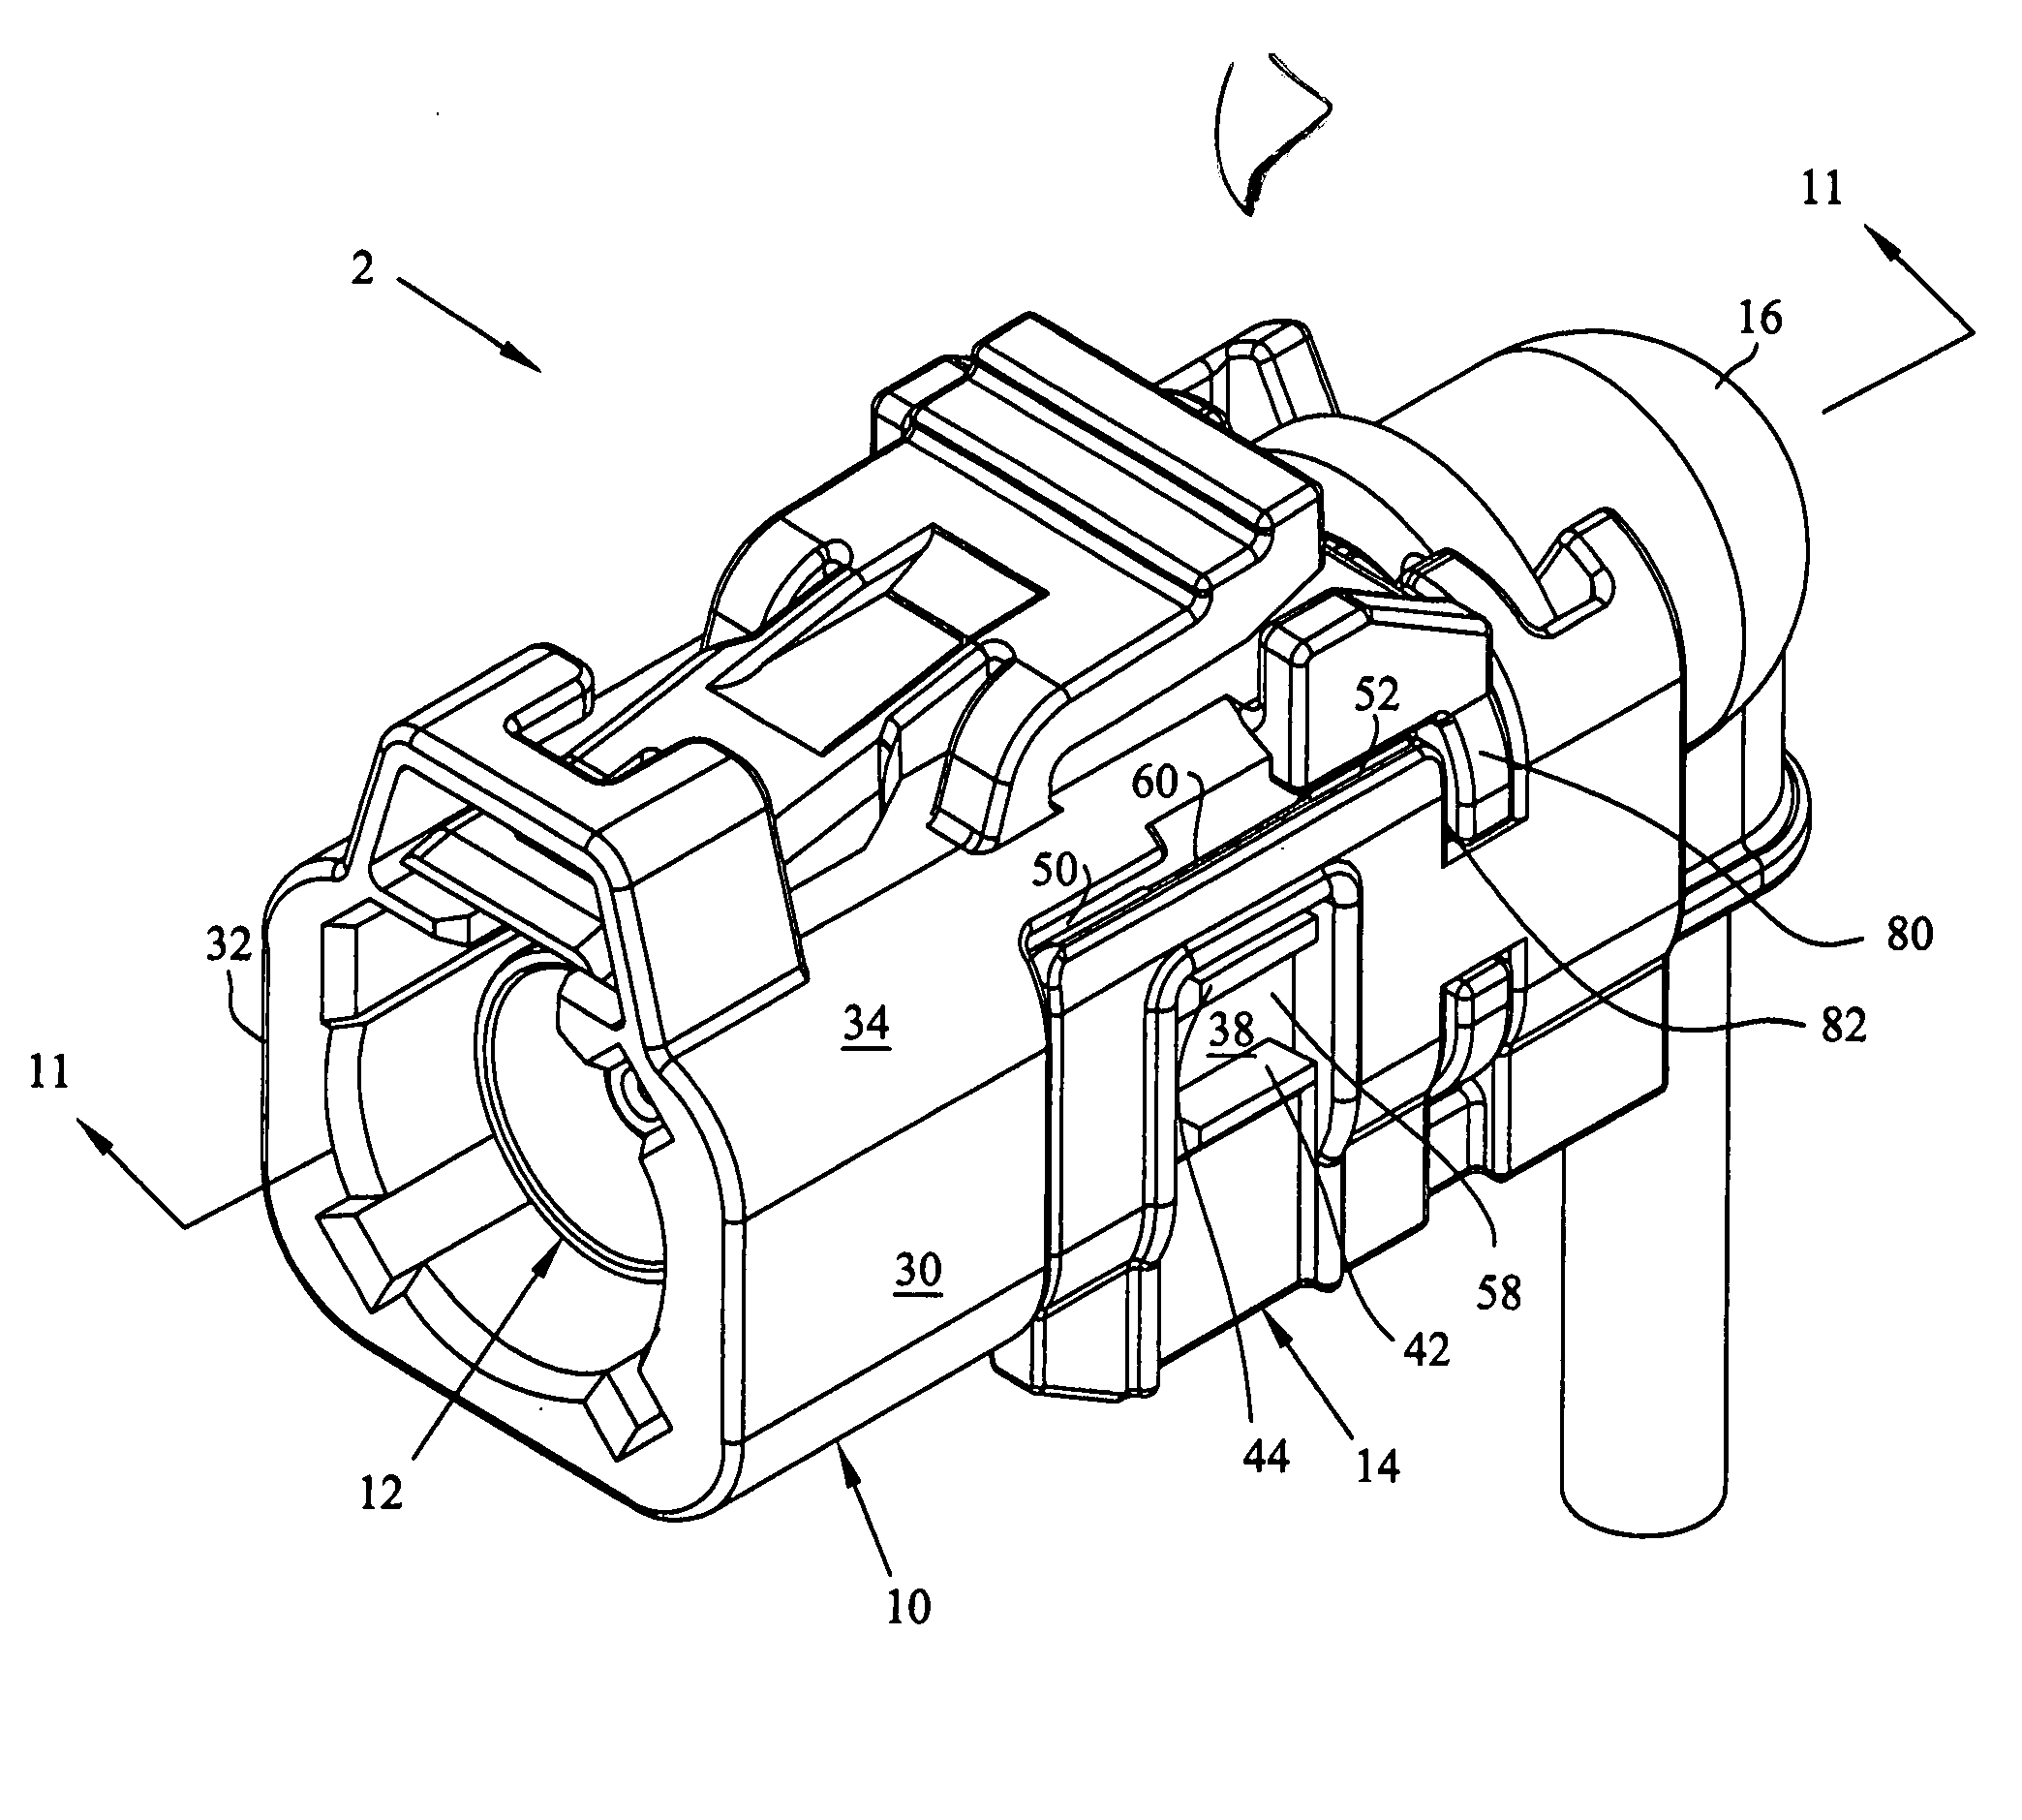 Cable exit for an electrical connector assembly